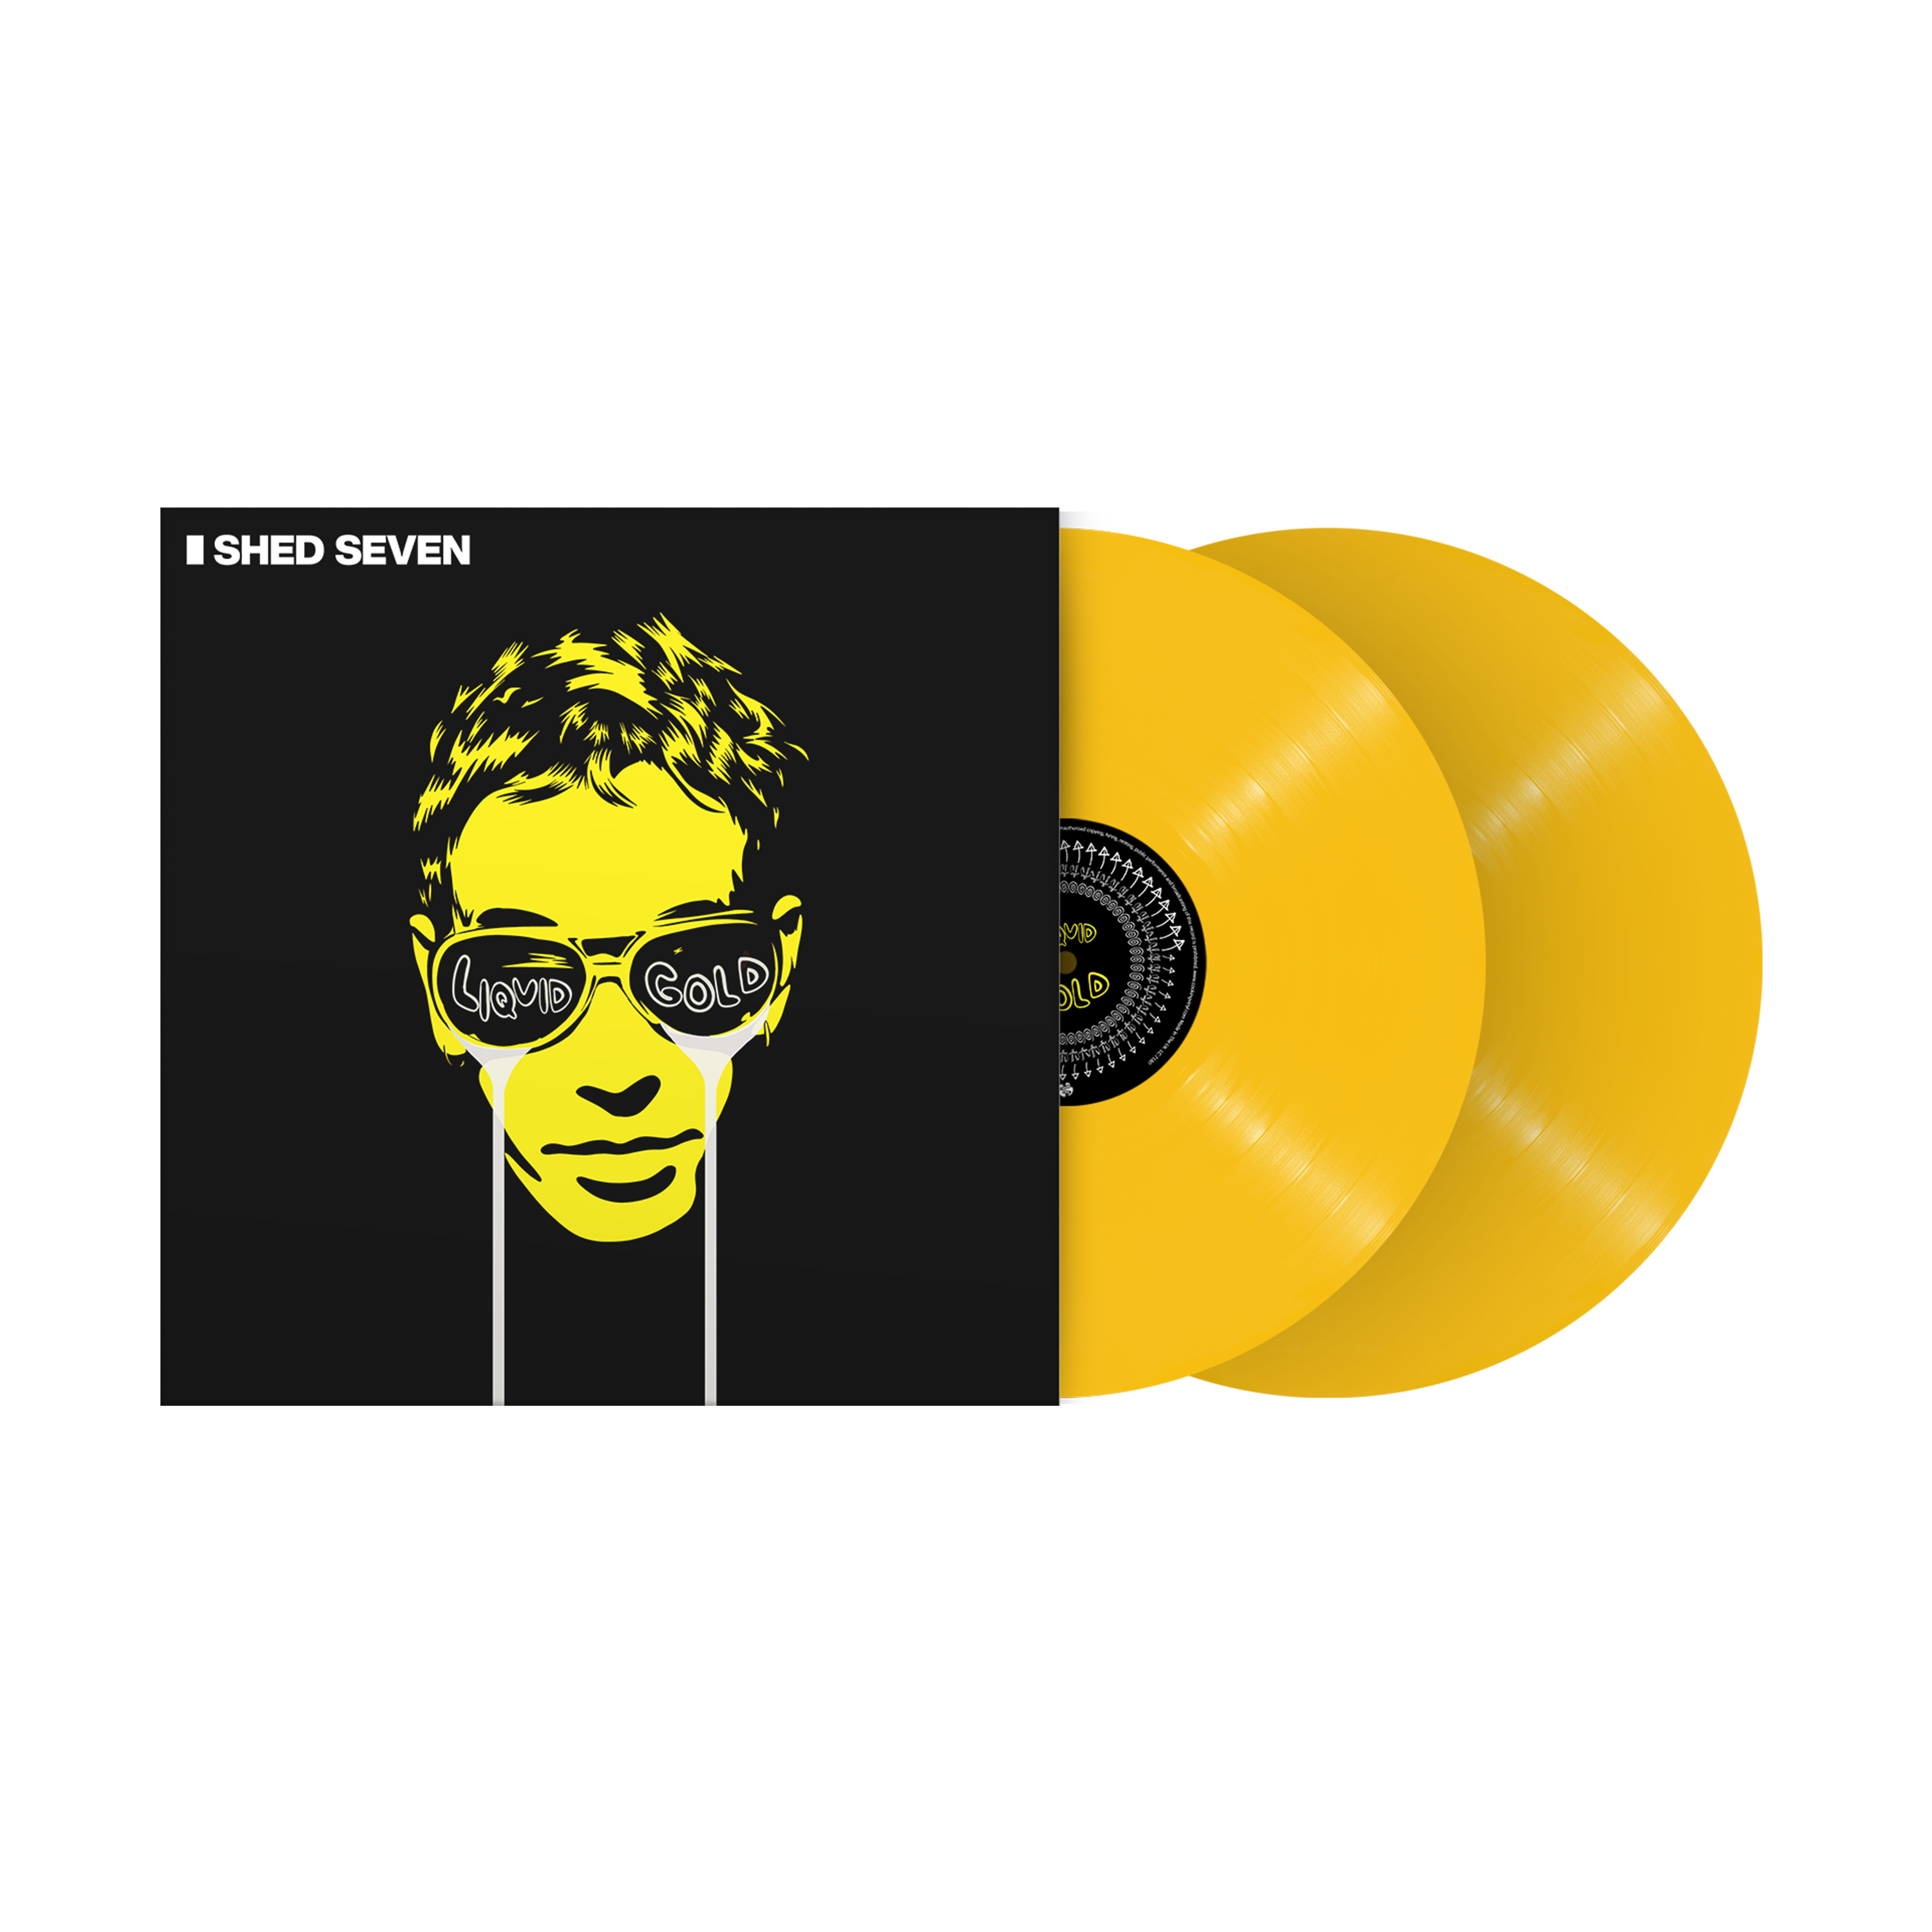 Shed Seven - Liquid Gold: Limited Yellow Vinyl 2LP